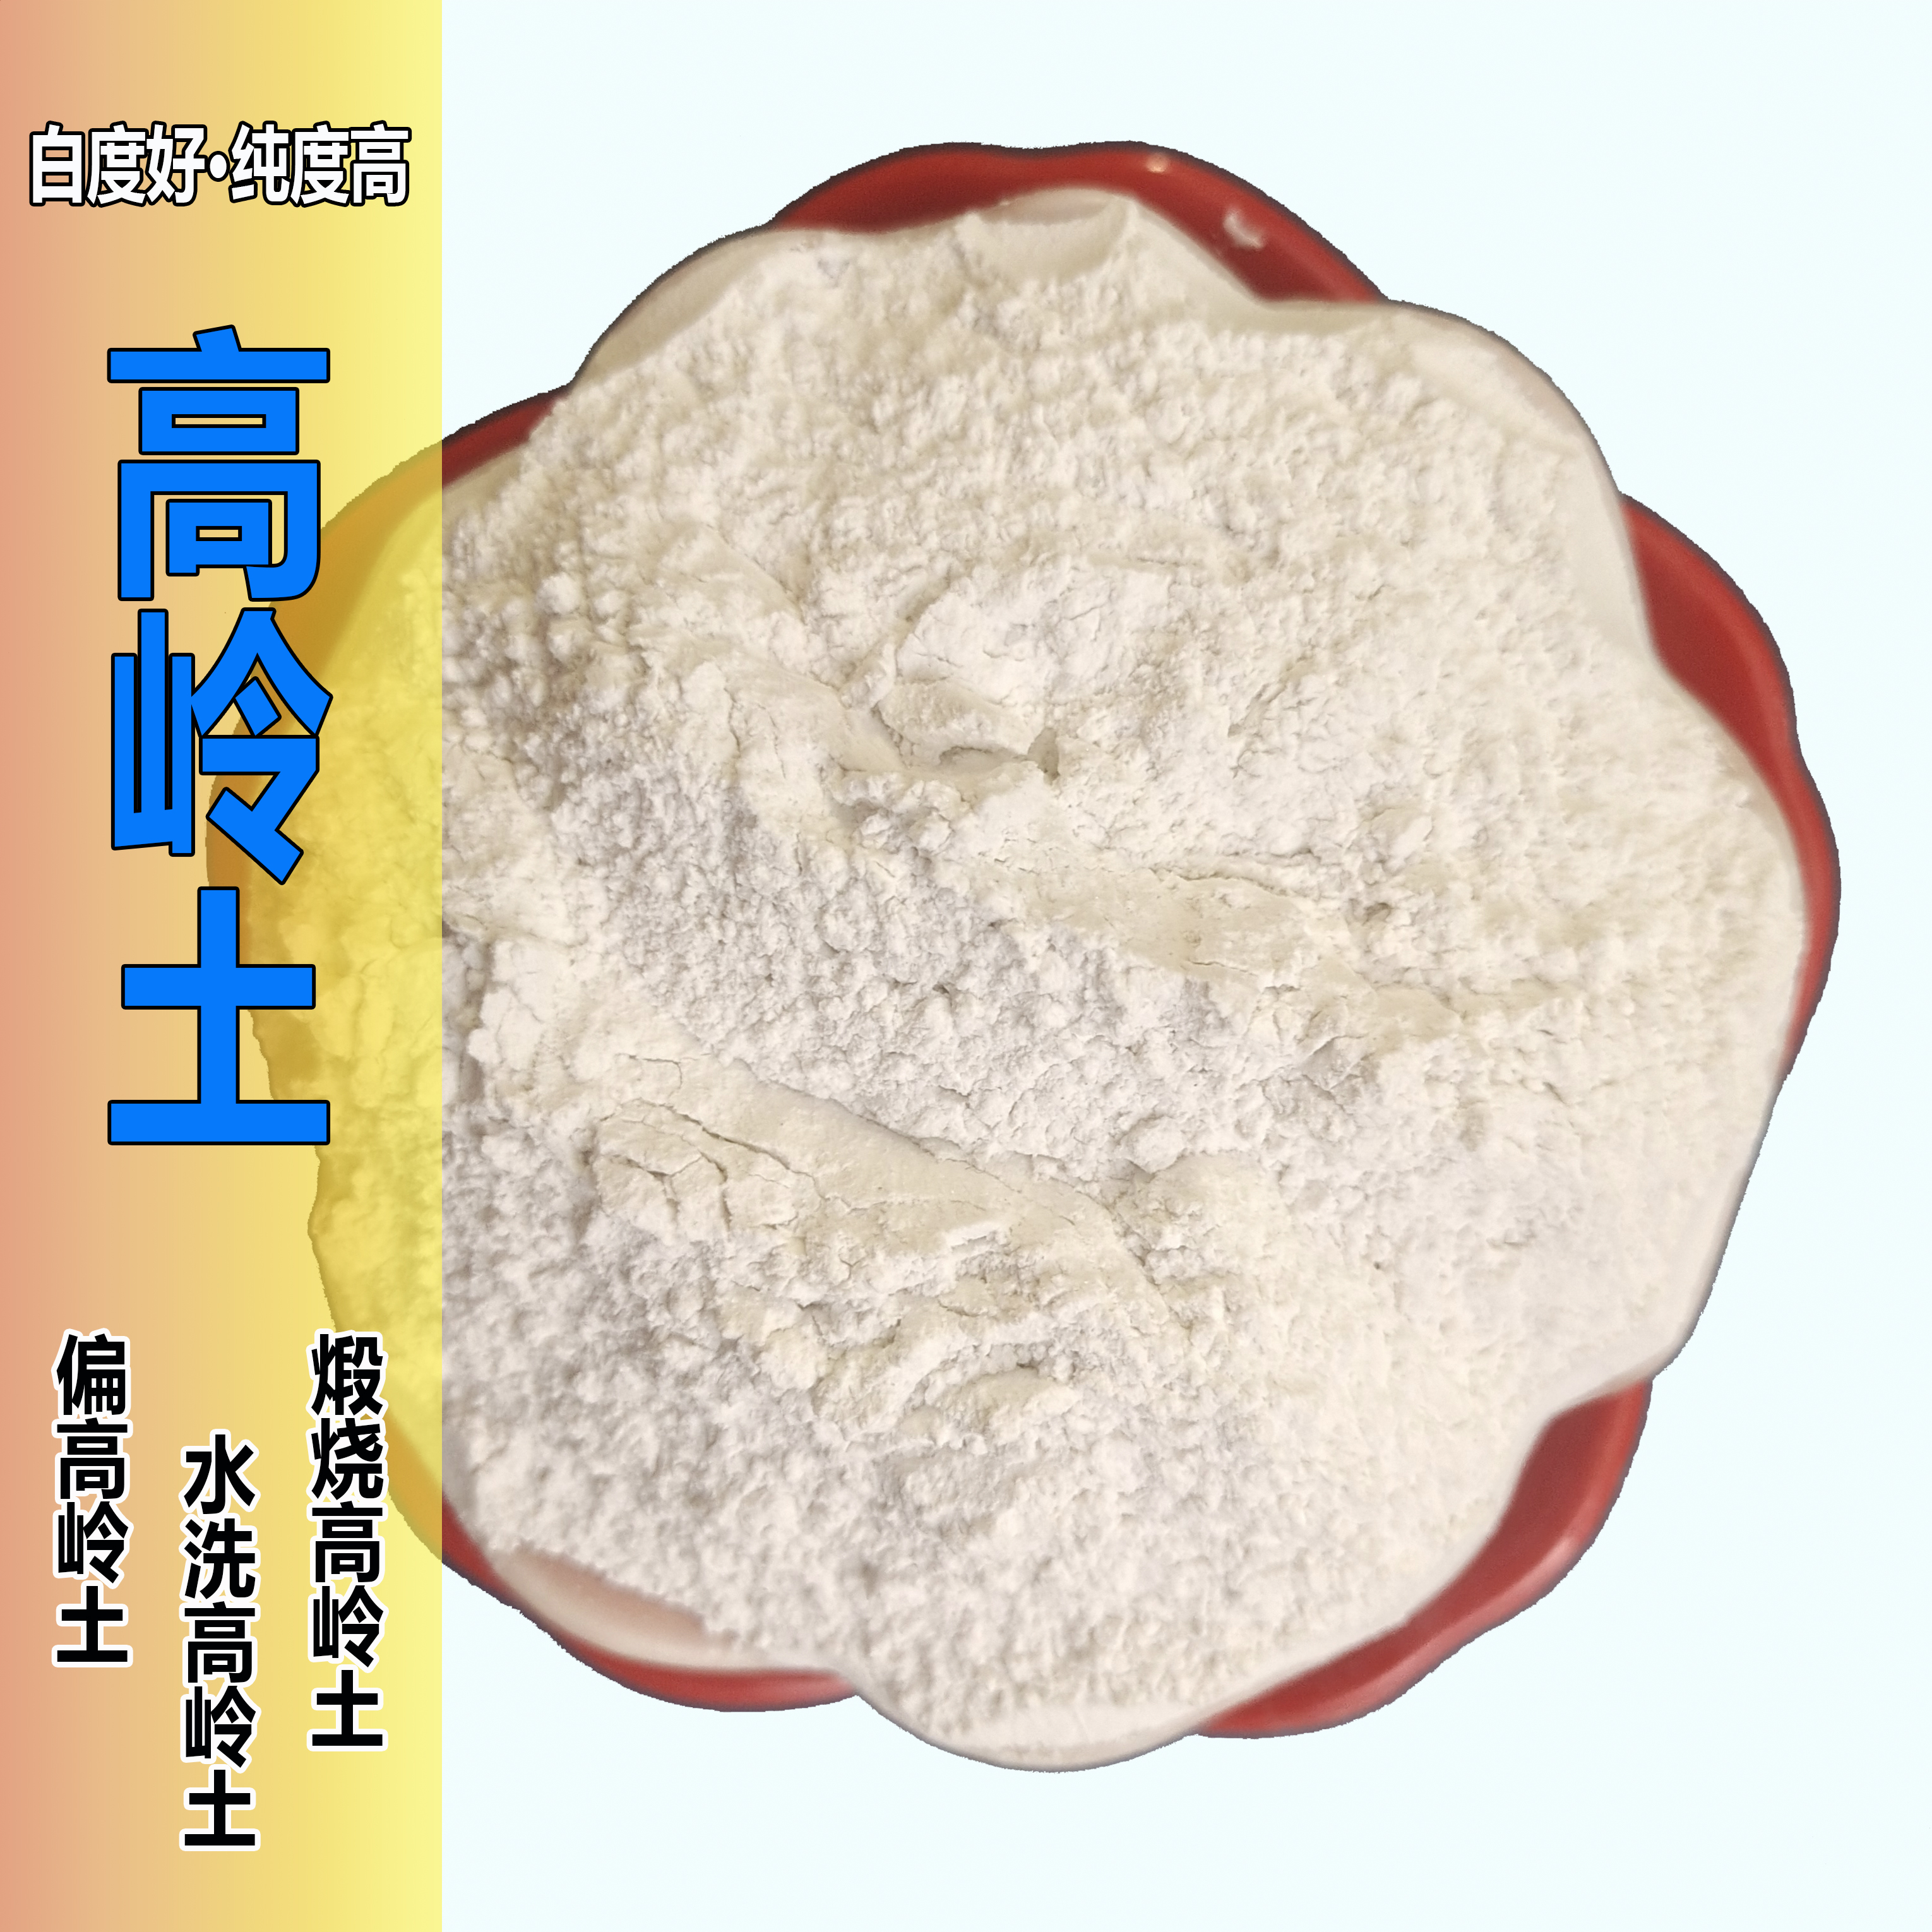 Yang's supply of plastic good clay white clay for washing kaolin ceramics with 4000 mesh high whiteness GLT-7